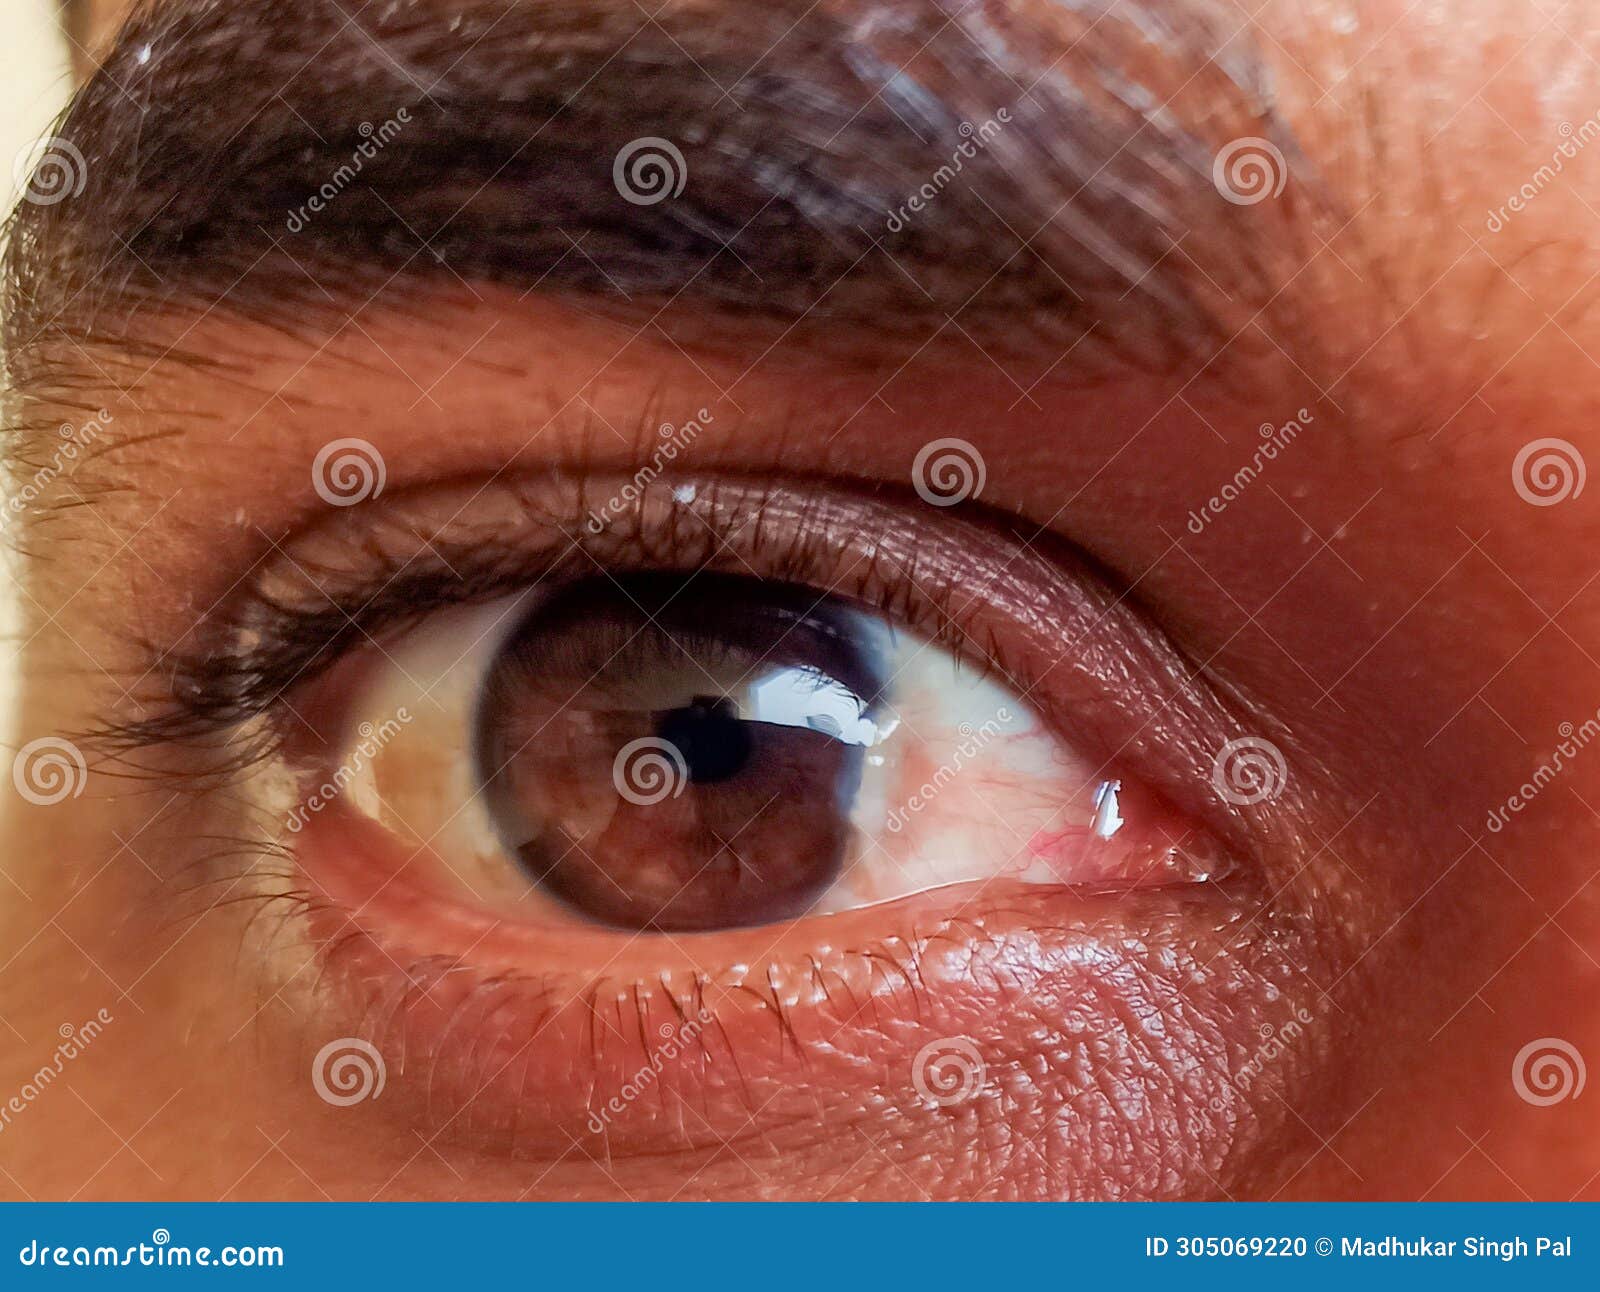 a man have pterygium is in the eye.